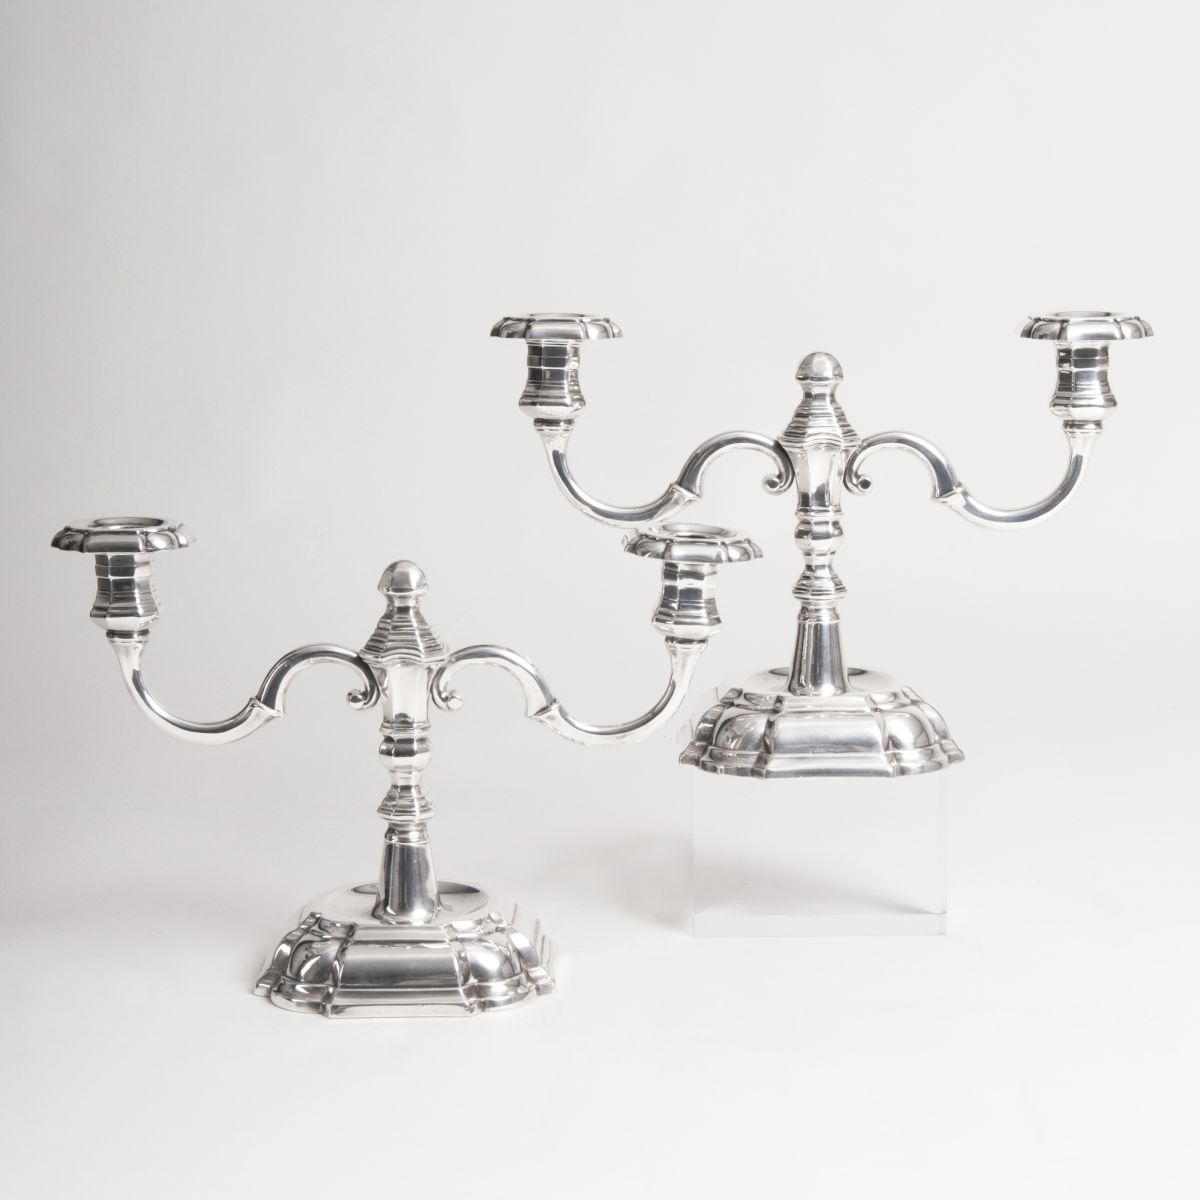 A pair of candelabras in Baroque style